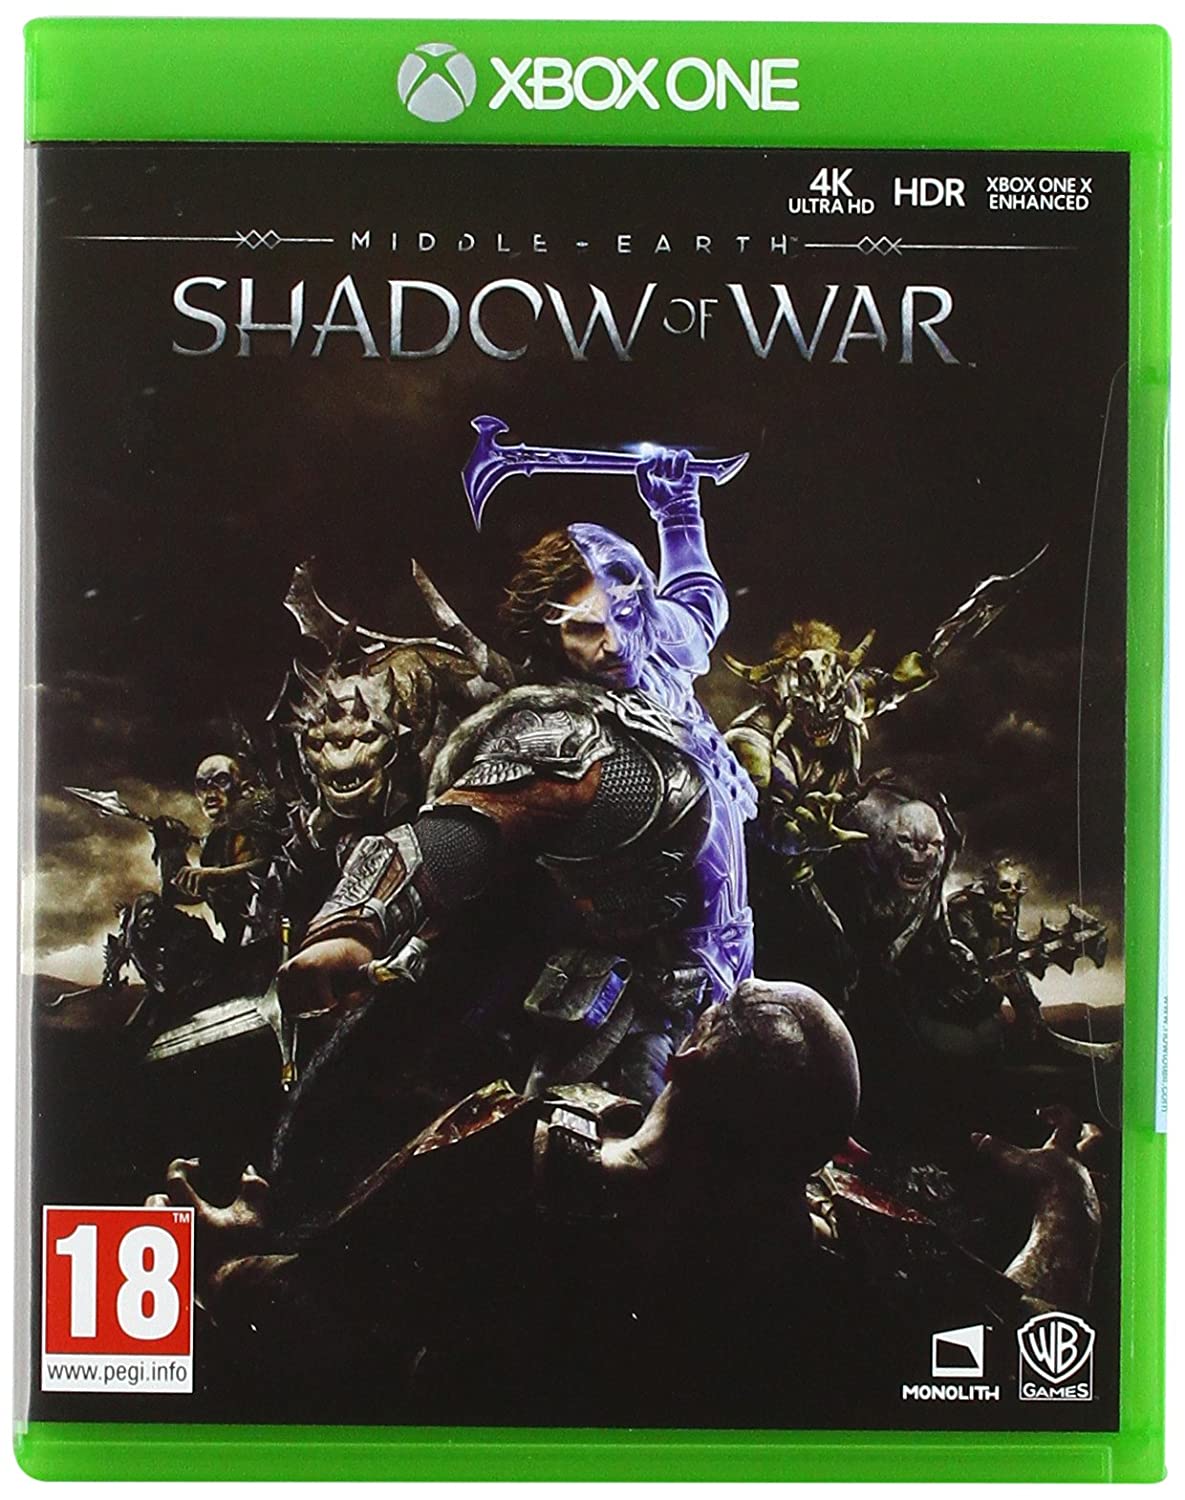 Middle-Earth: Shadow Of War PS4 Xbox One (New)